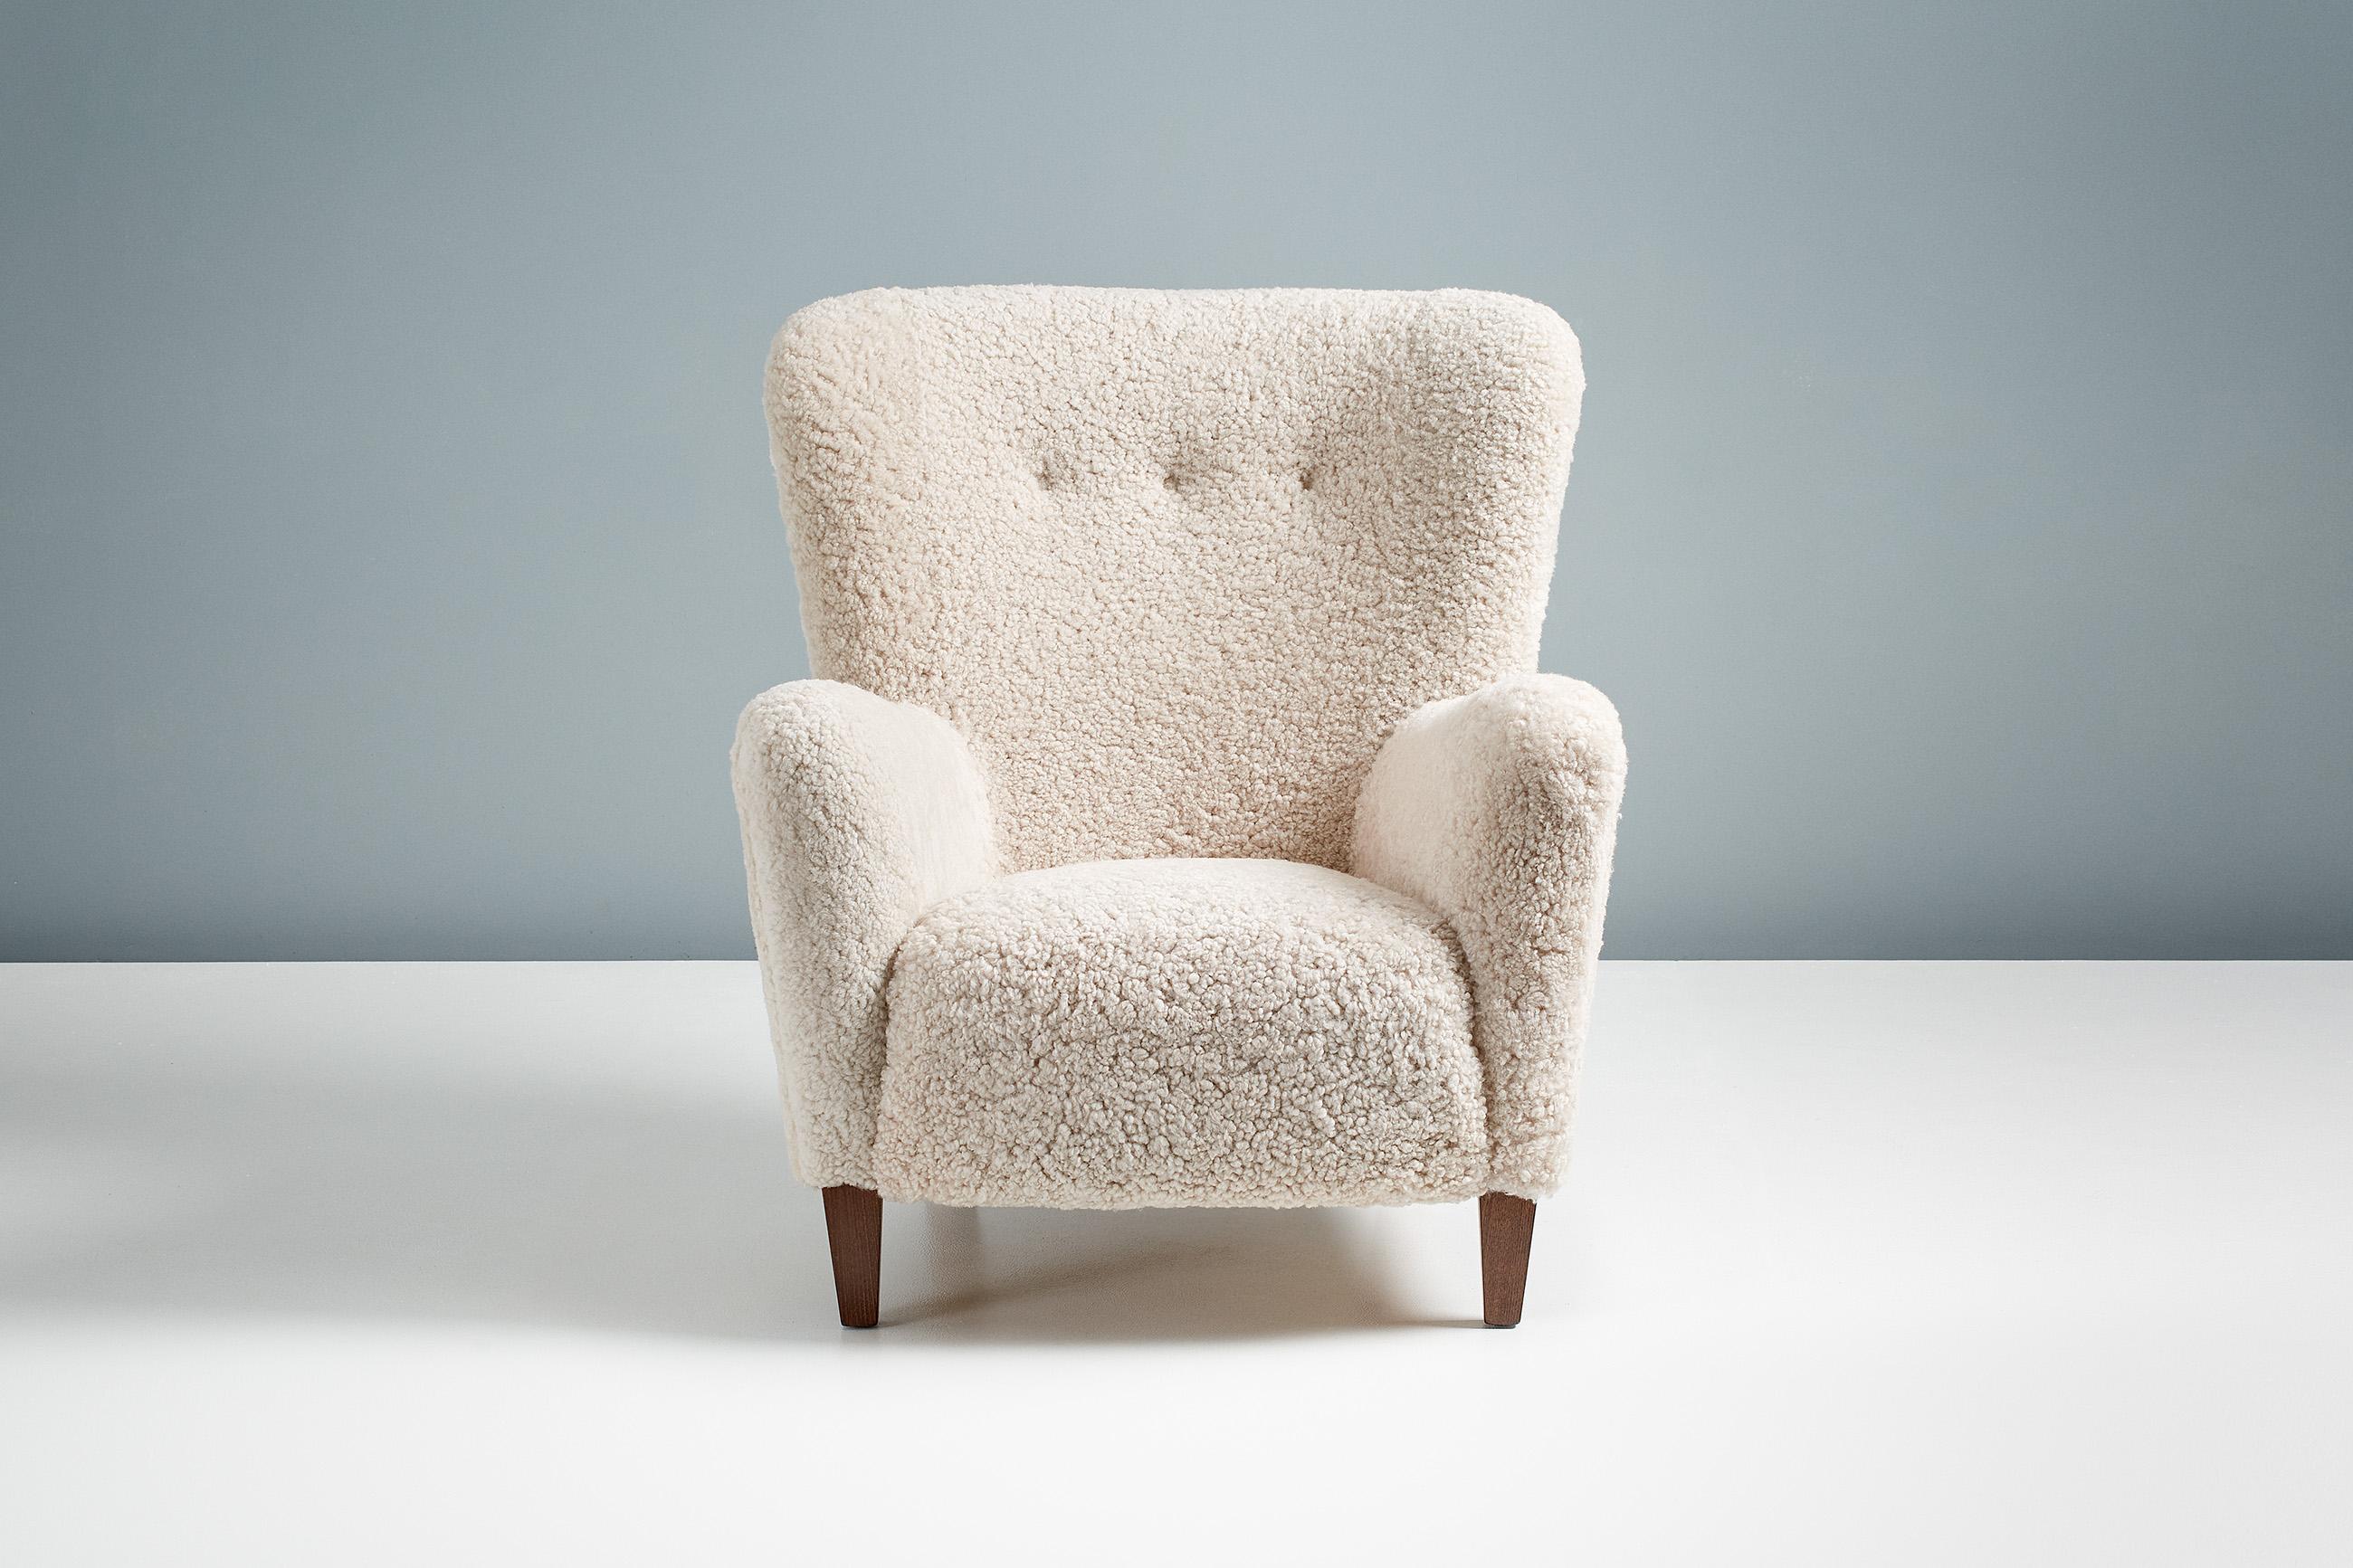 Dagmar Design

Ryo lounge chair

A pair of custom made lounge chairs developed and produced at our workshops in London using the highest quality materials. These examples are upholstered in luxurious 'Moonlight' Australian sheepskin. The Ryo